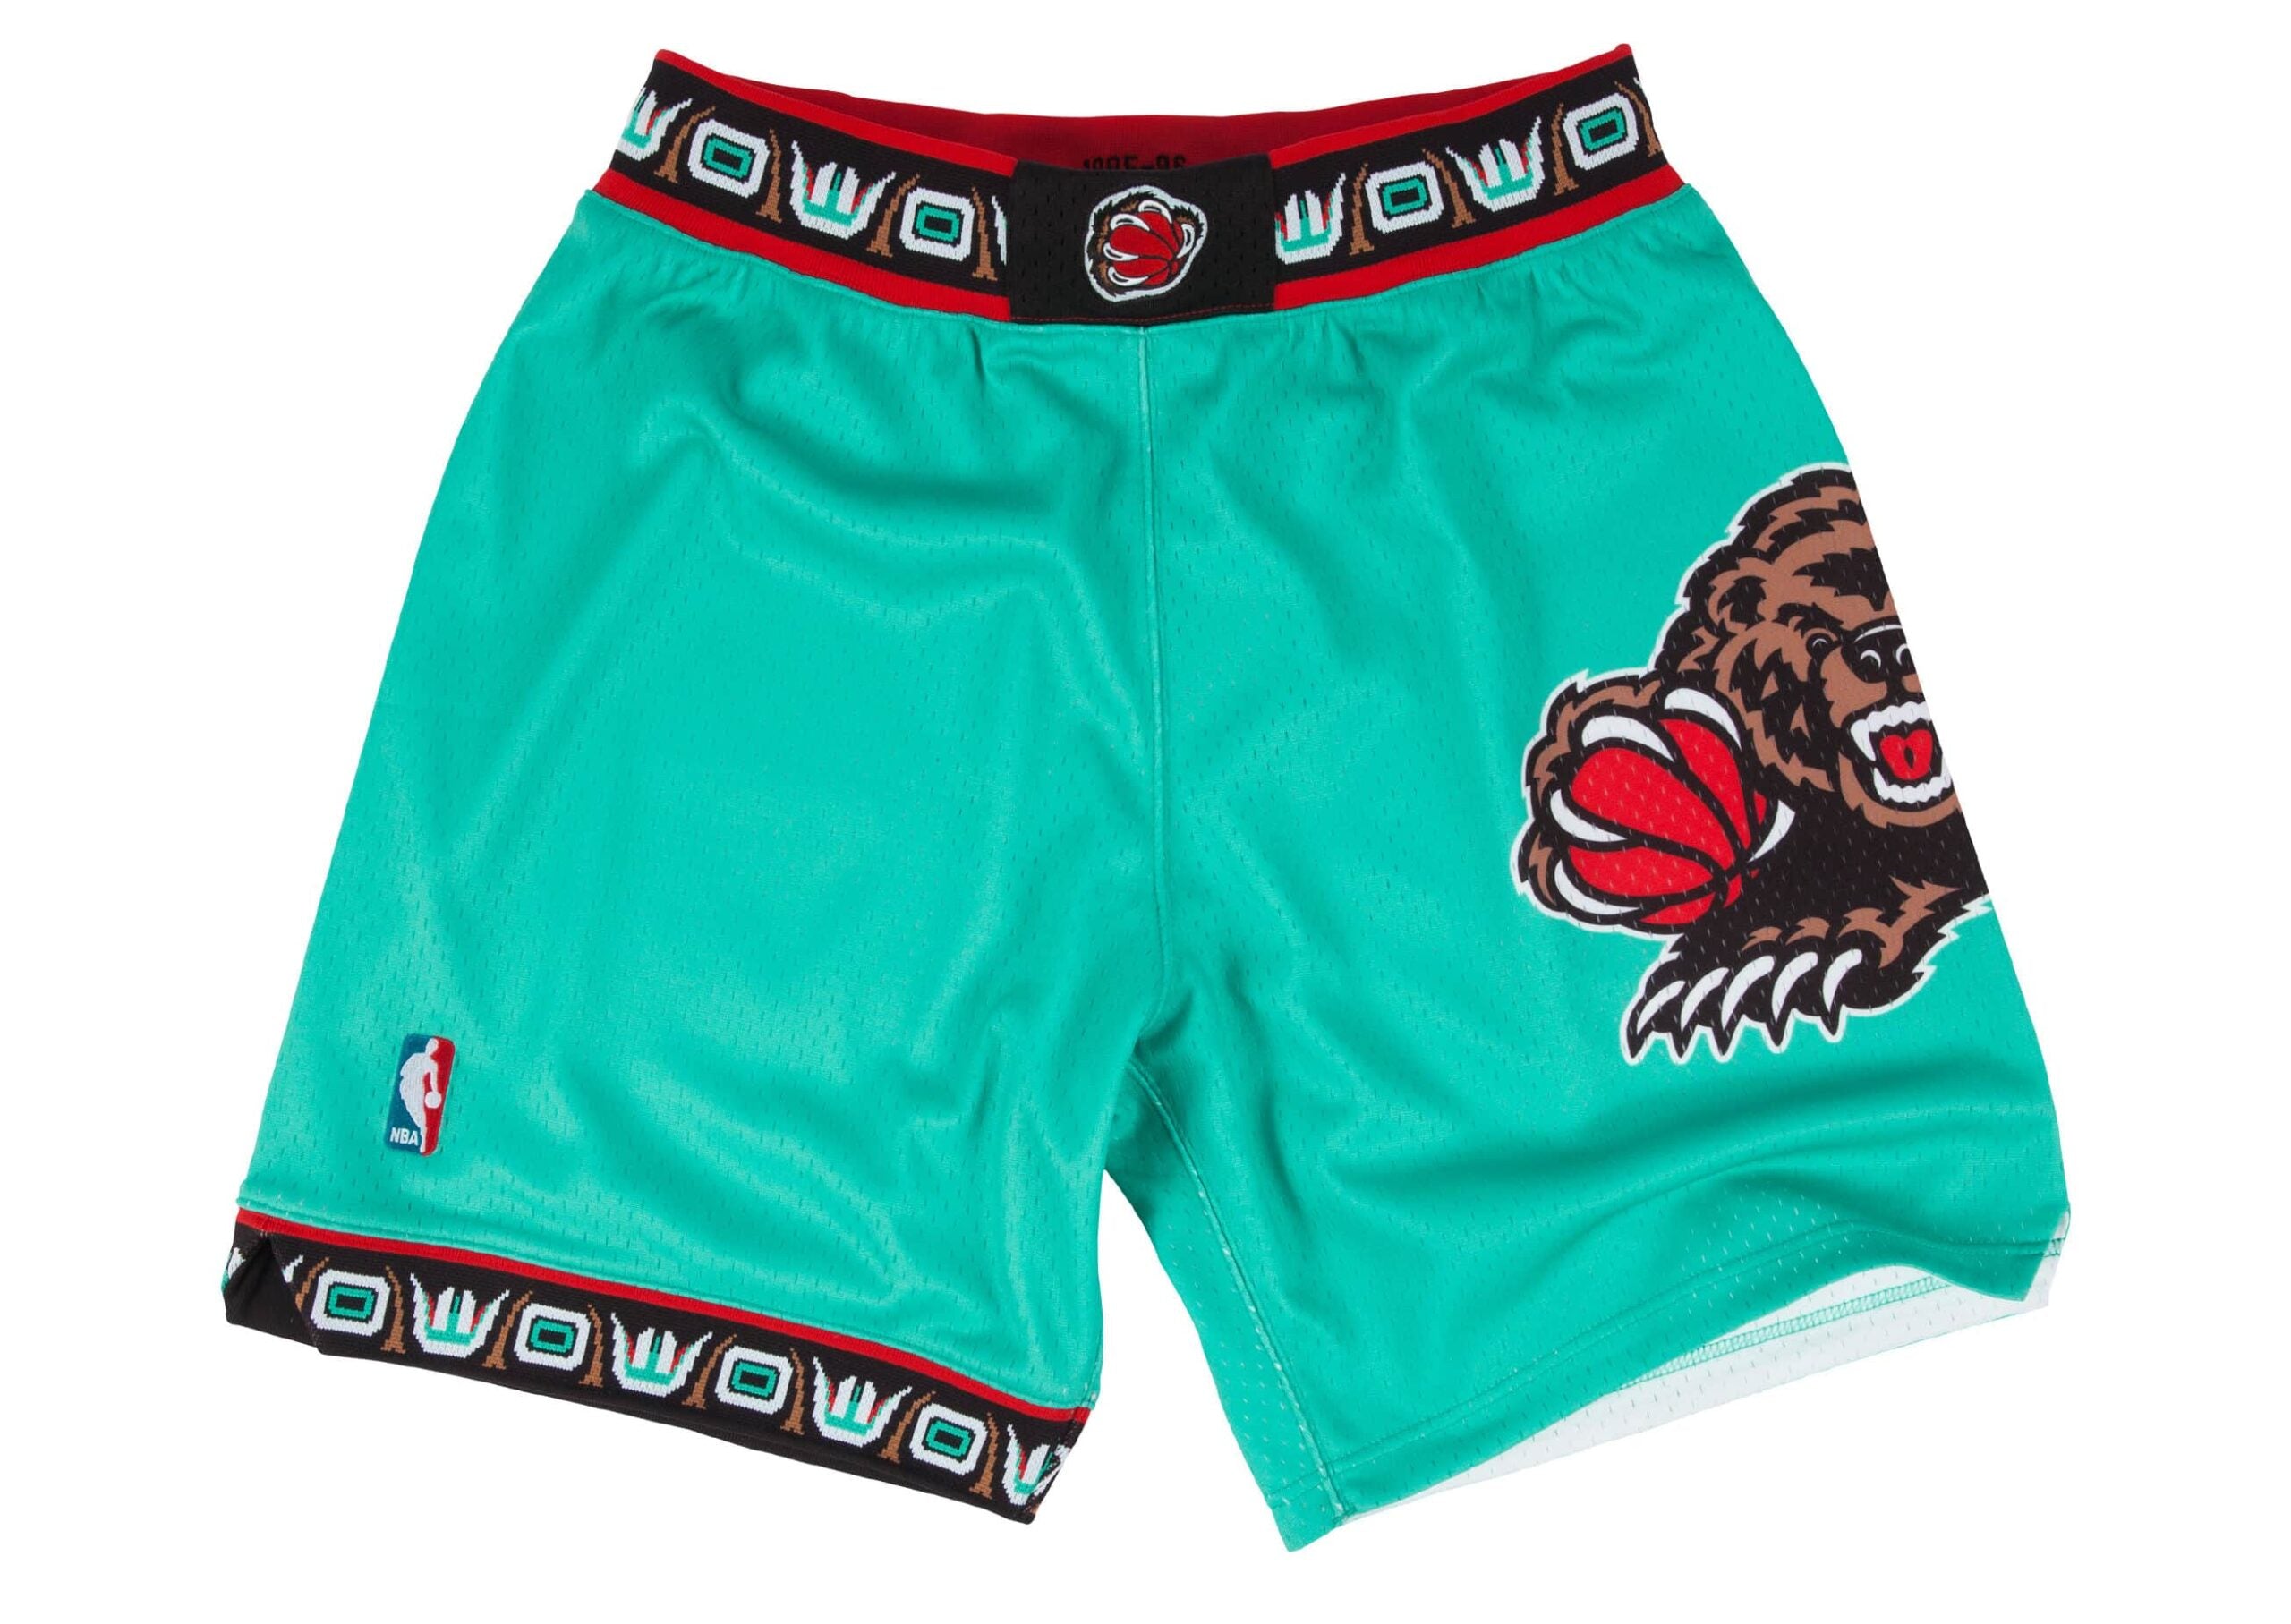 Mitchell And Ness Men's Mitchell & Ness Vancouver Grizzlies NBA